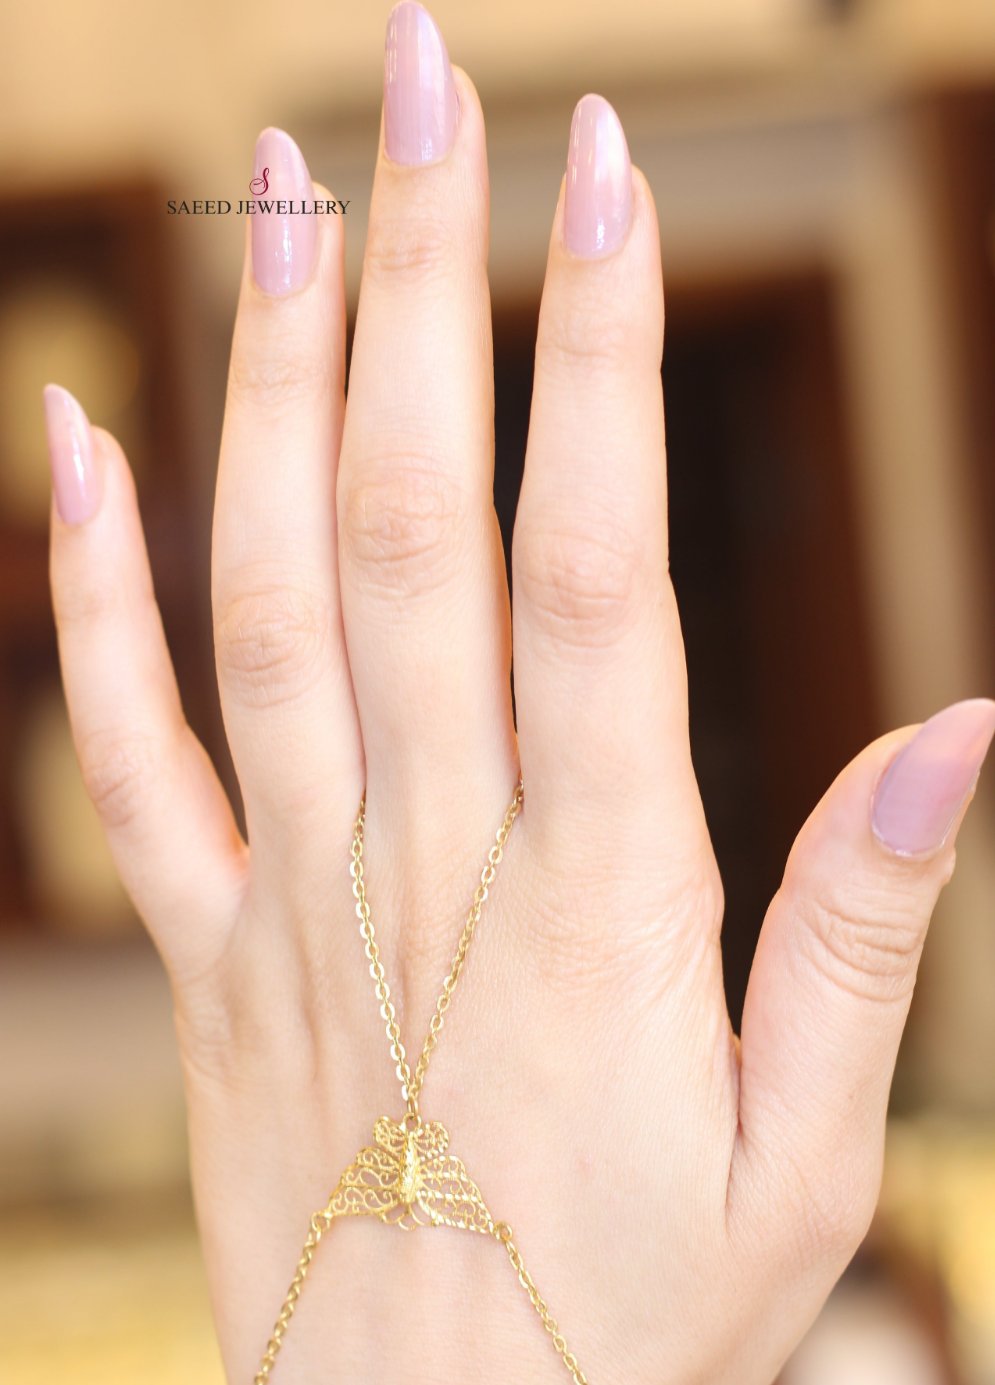 21K Gold Chain Hand Bracelet by Saeed Jewelry - Image 5